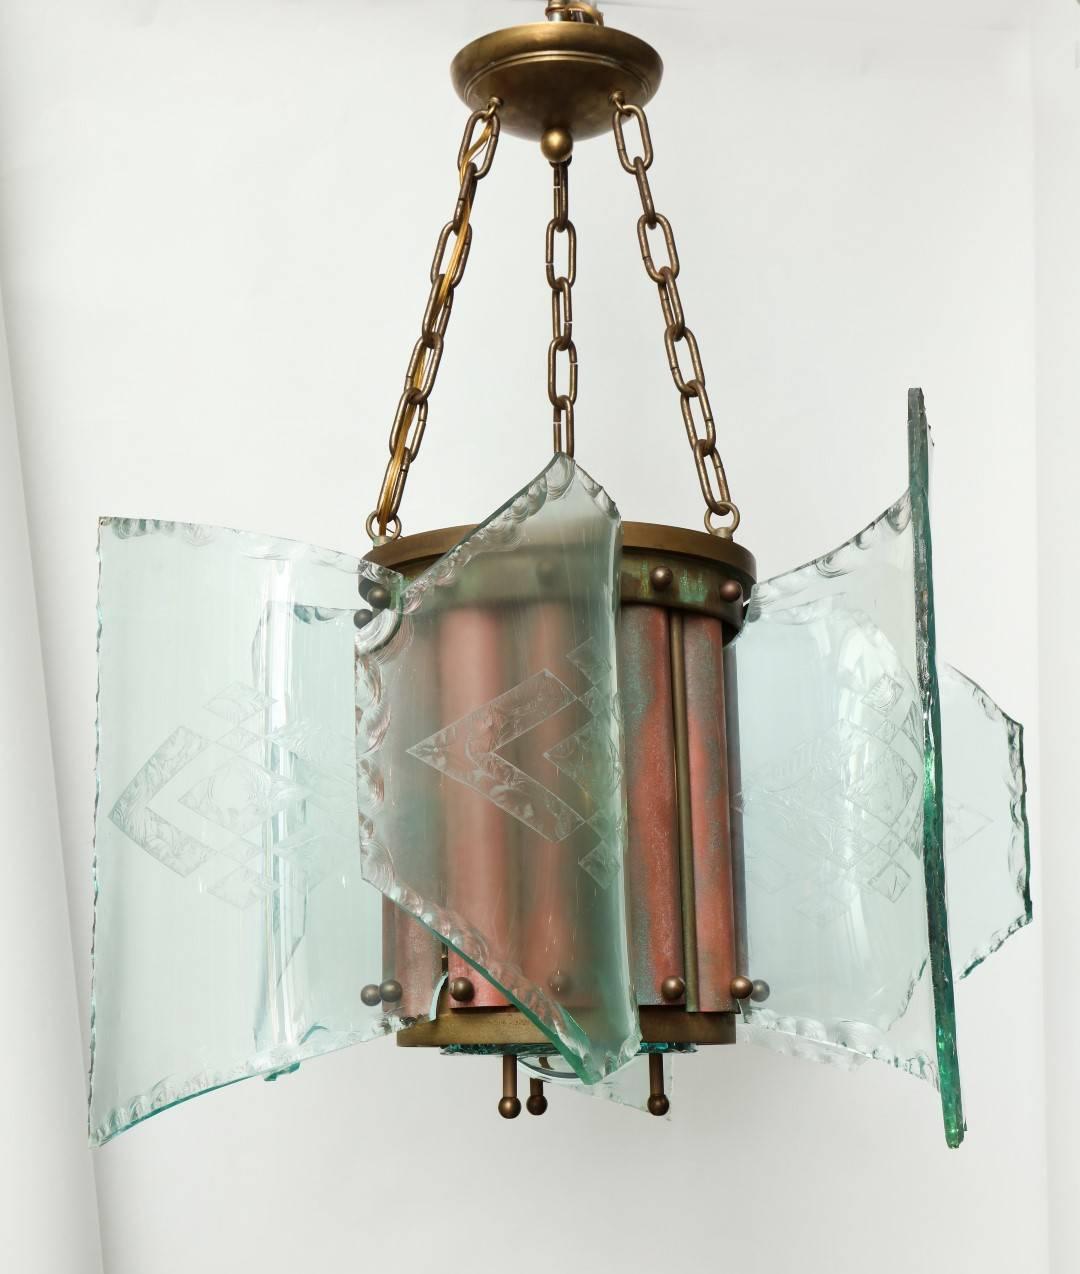 A Curved Glass American Arts & Crafts Style Ceiling Fixture. The cylindrical bronze frame suspended from four lengths of chain and having an enameled and patinated finish to the fixture body. The frame securing six curved rectangular sections of